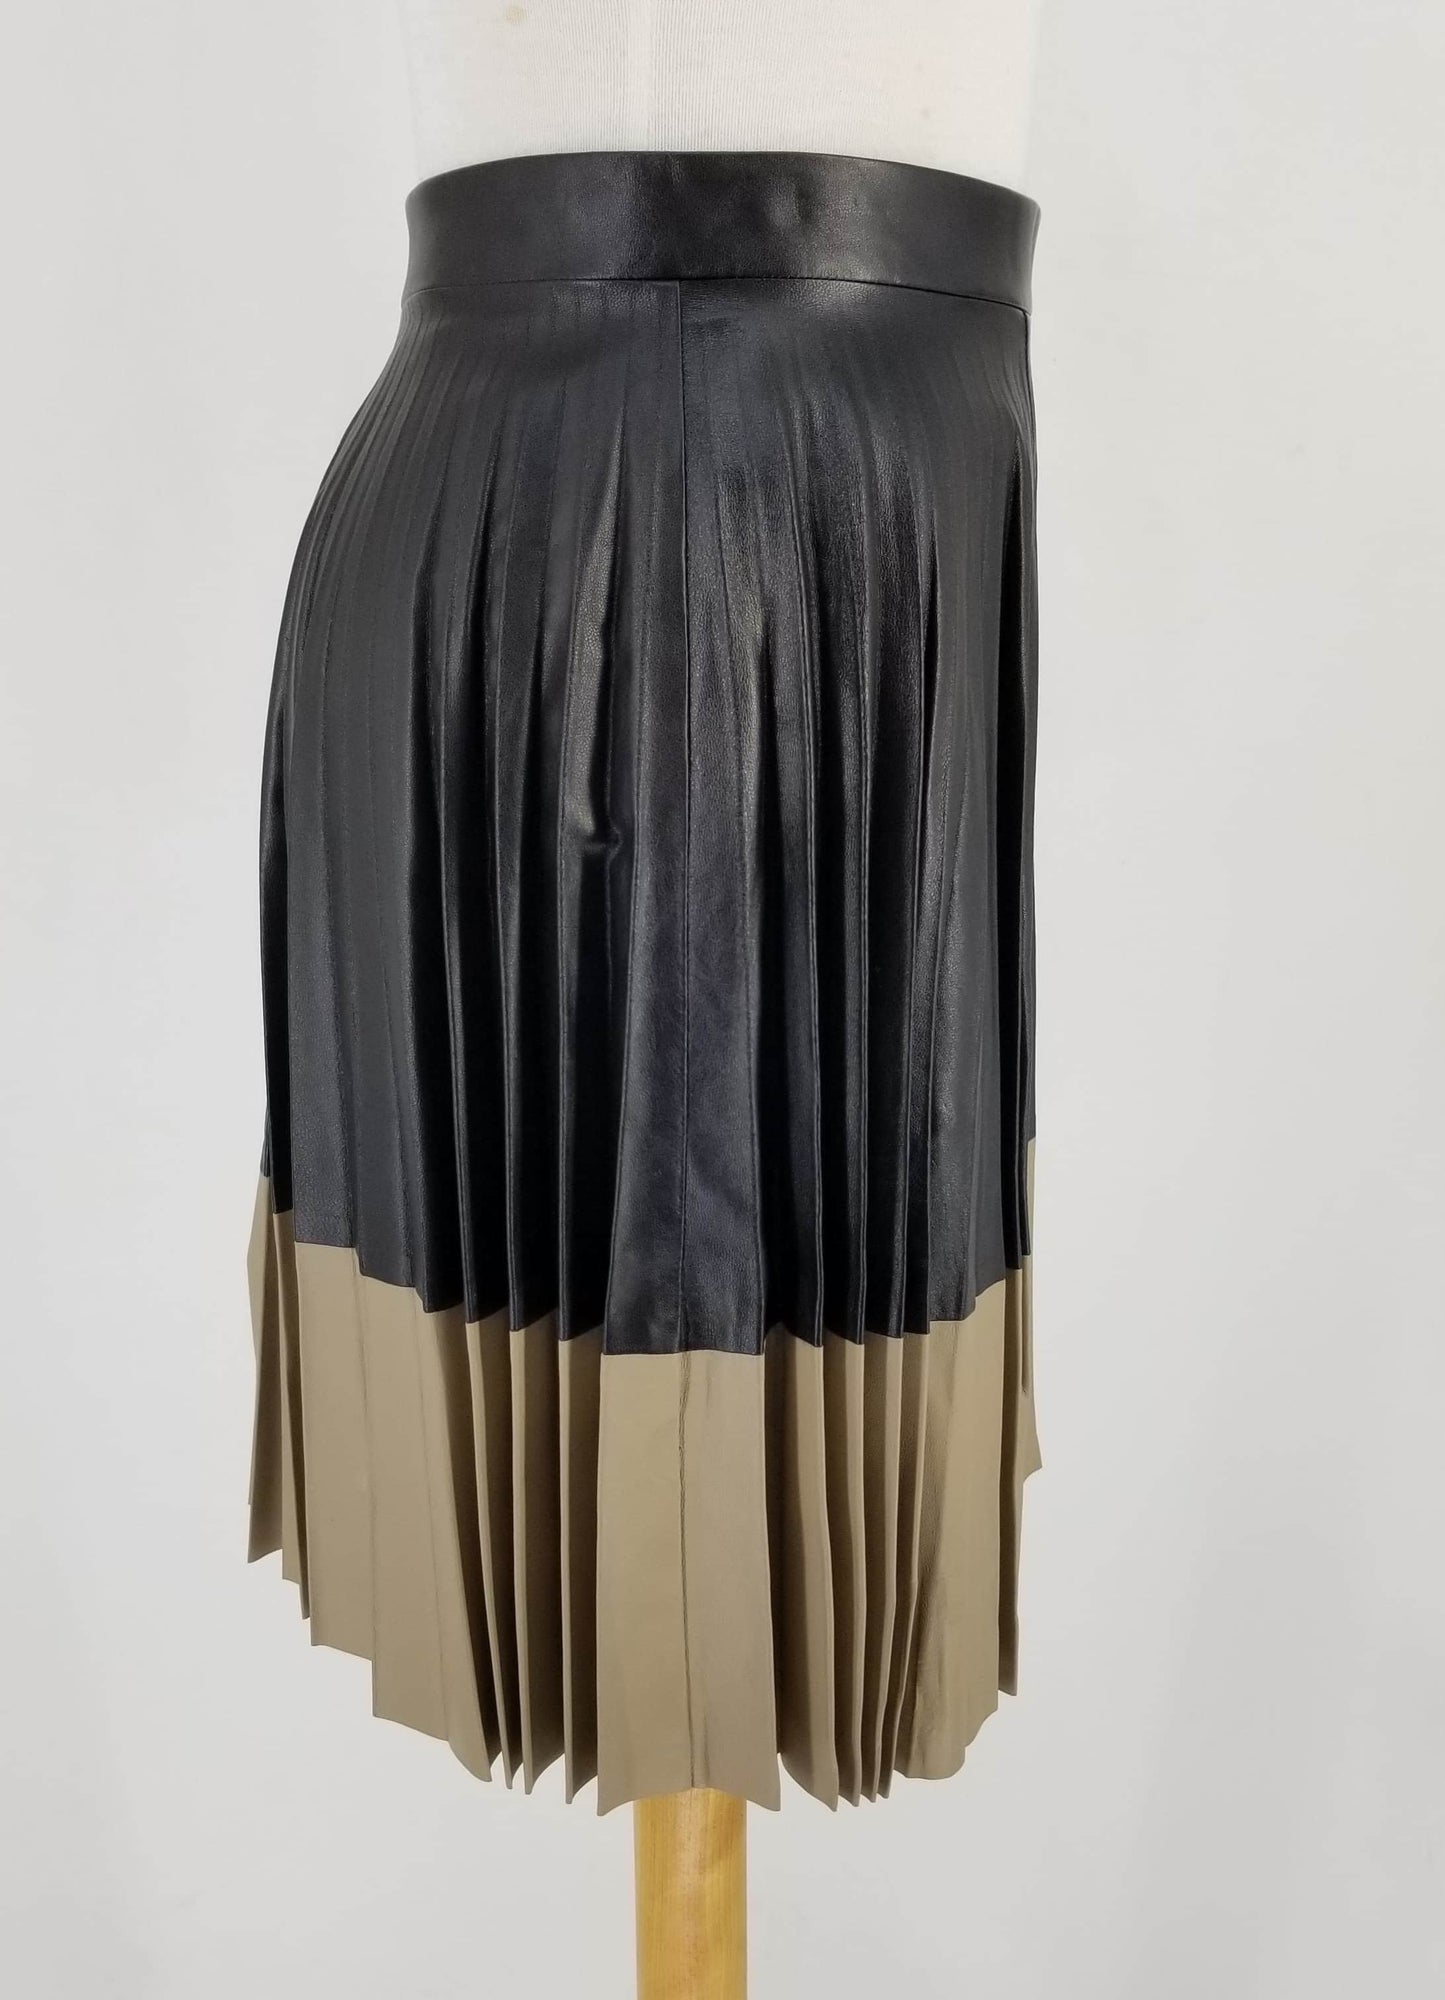 Authentic Robert Rodriguez Black and Beige Pleated Leather Skirt Sz 6